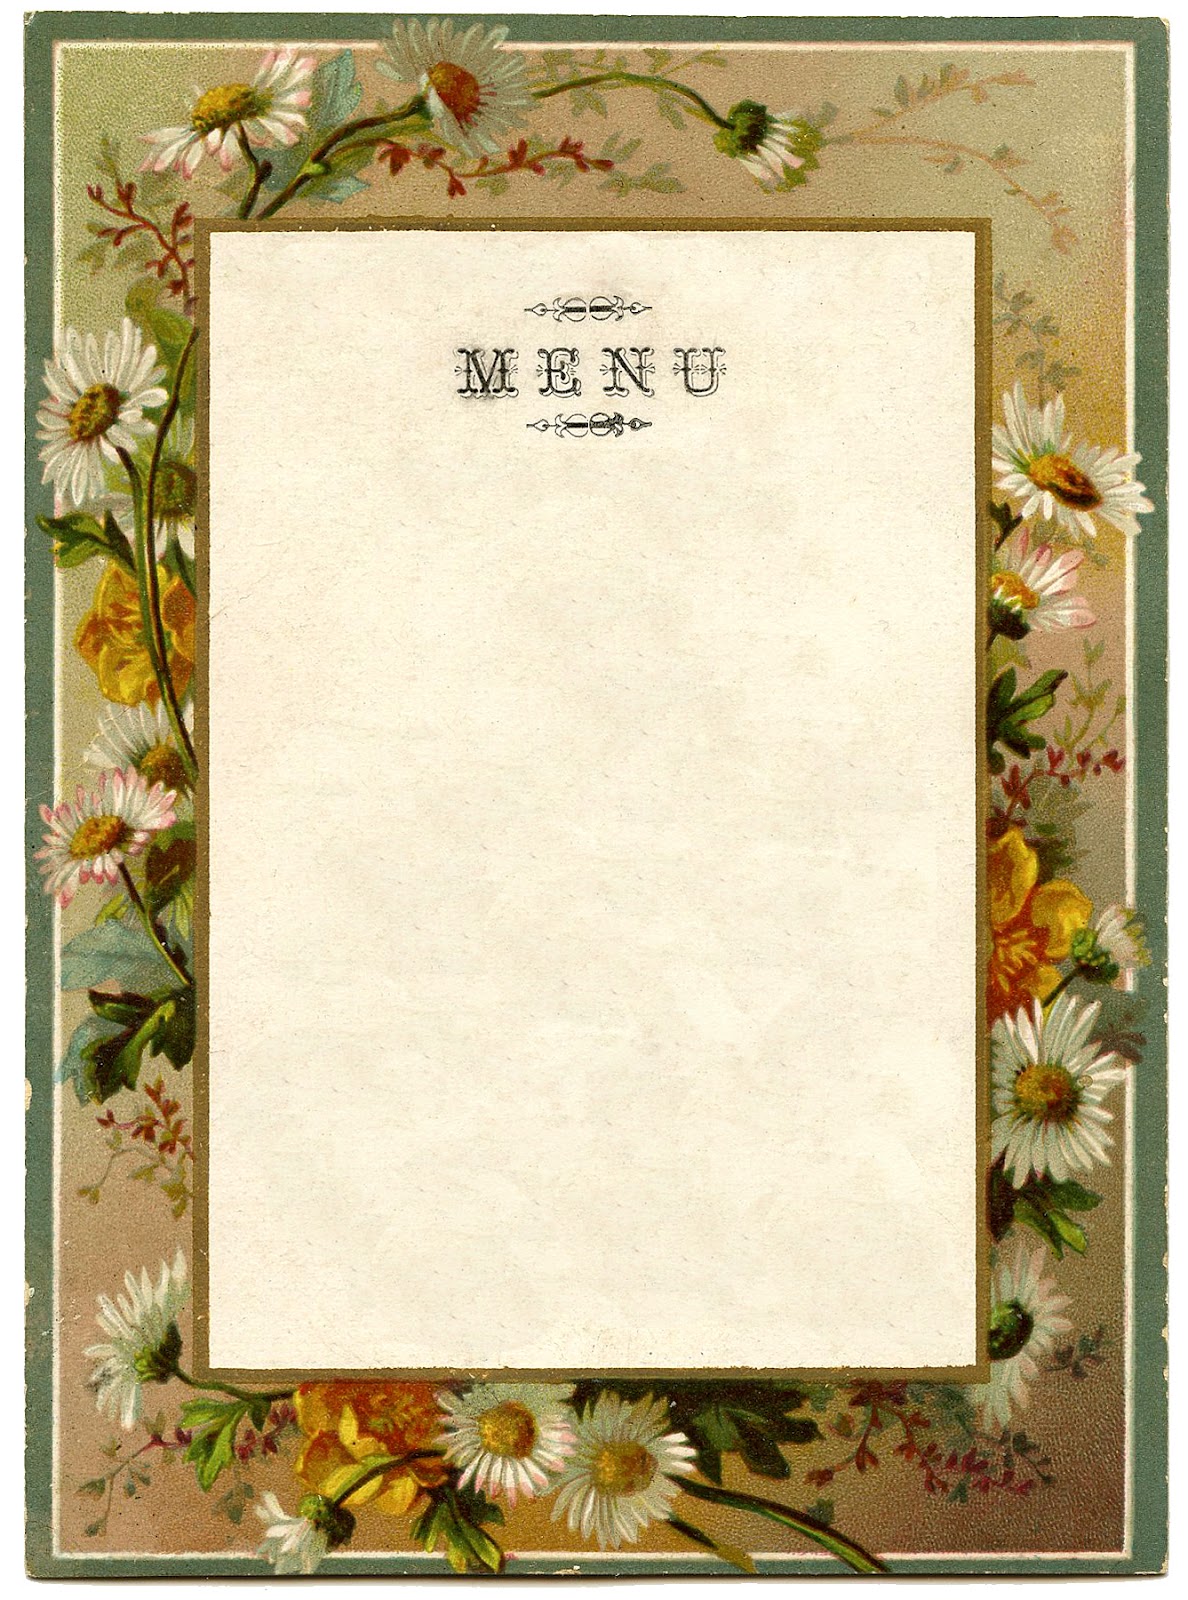 Vintage French Menu   Daisy Frame   The Graphics Fairy